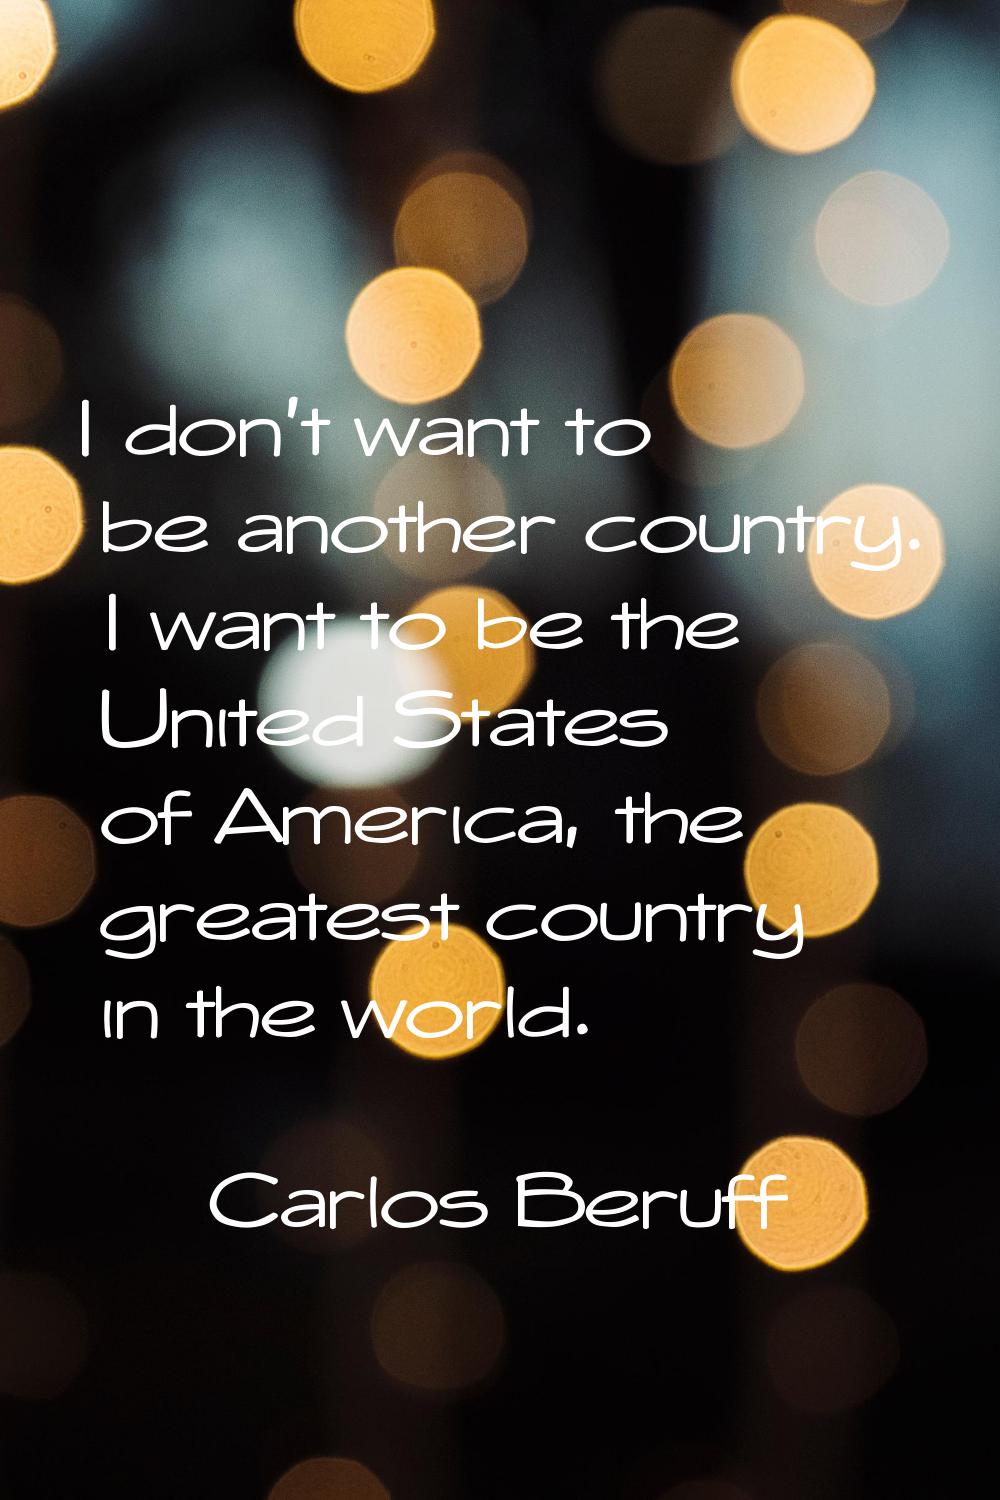 I don't want to be another country. I want to be the United States of America, the greatest country